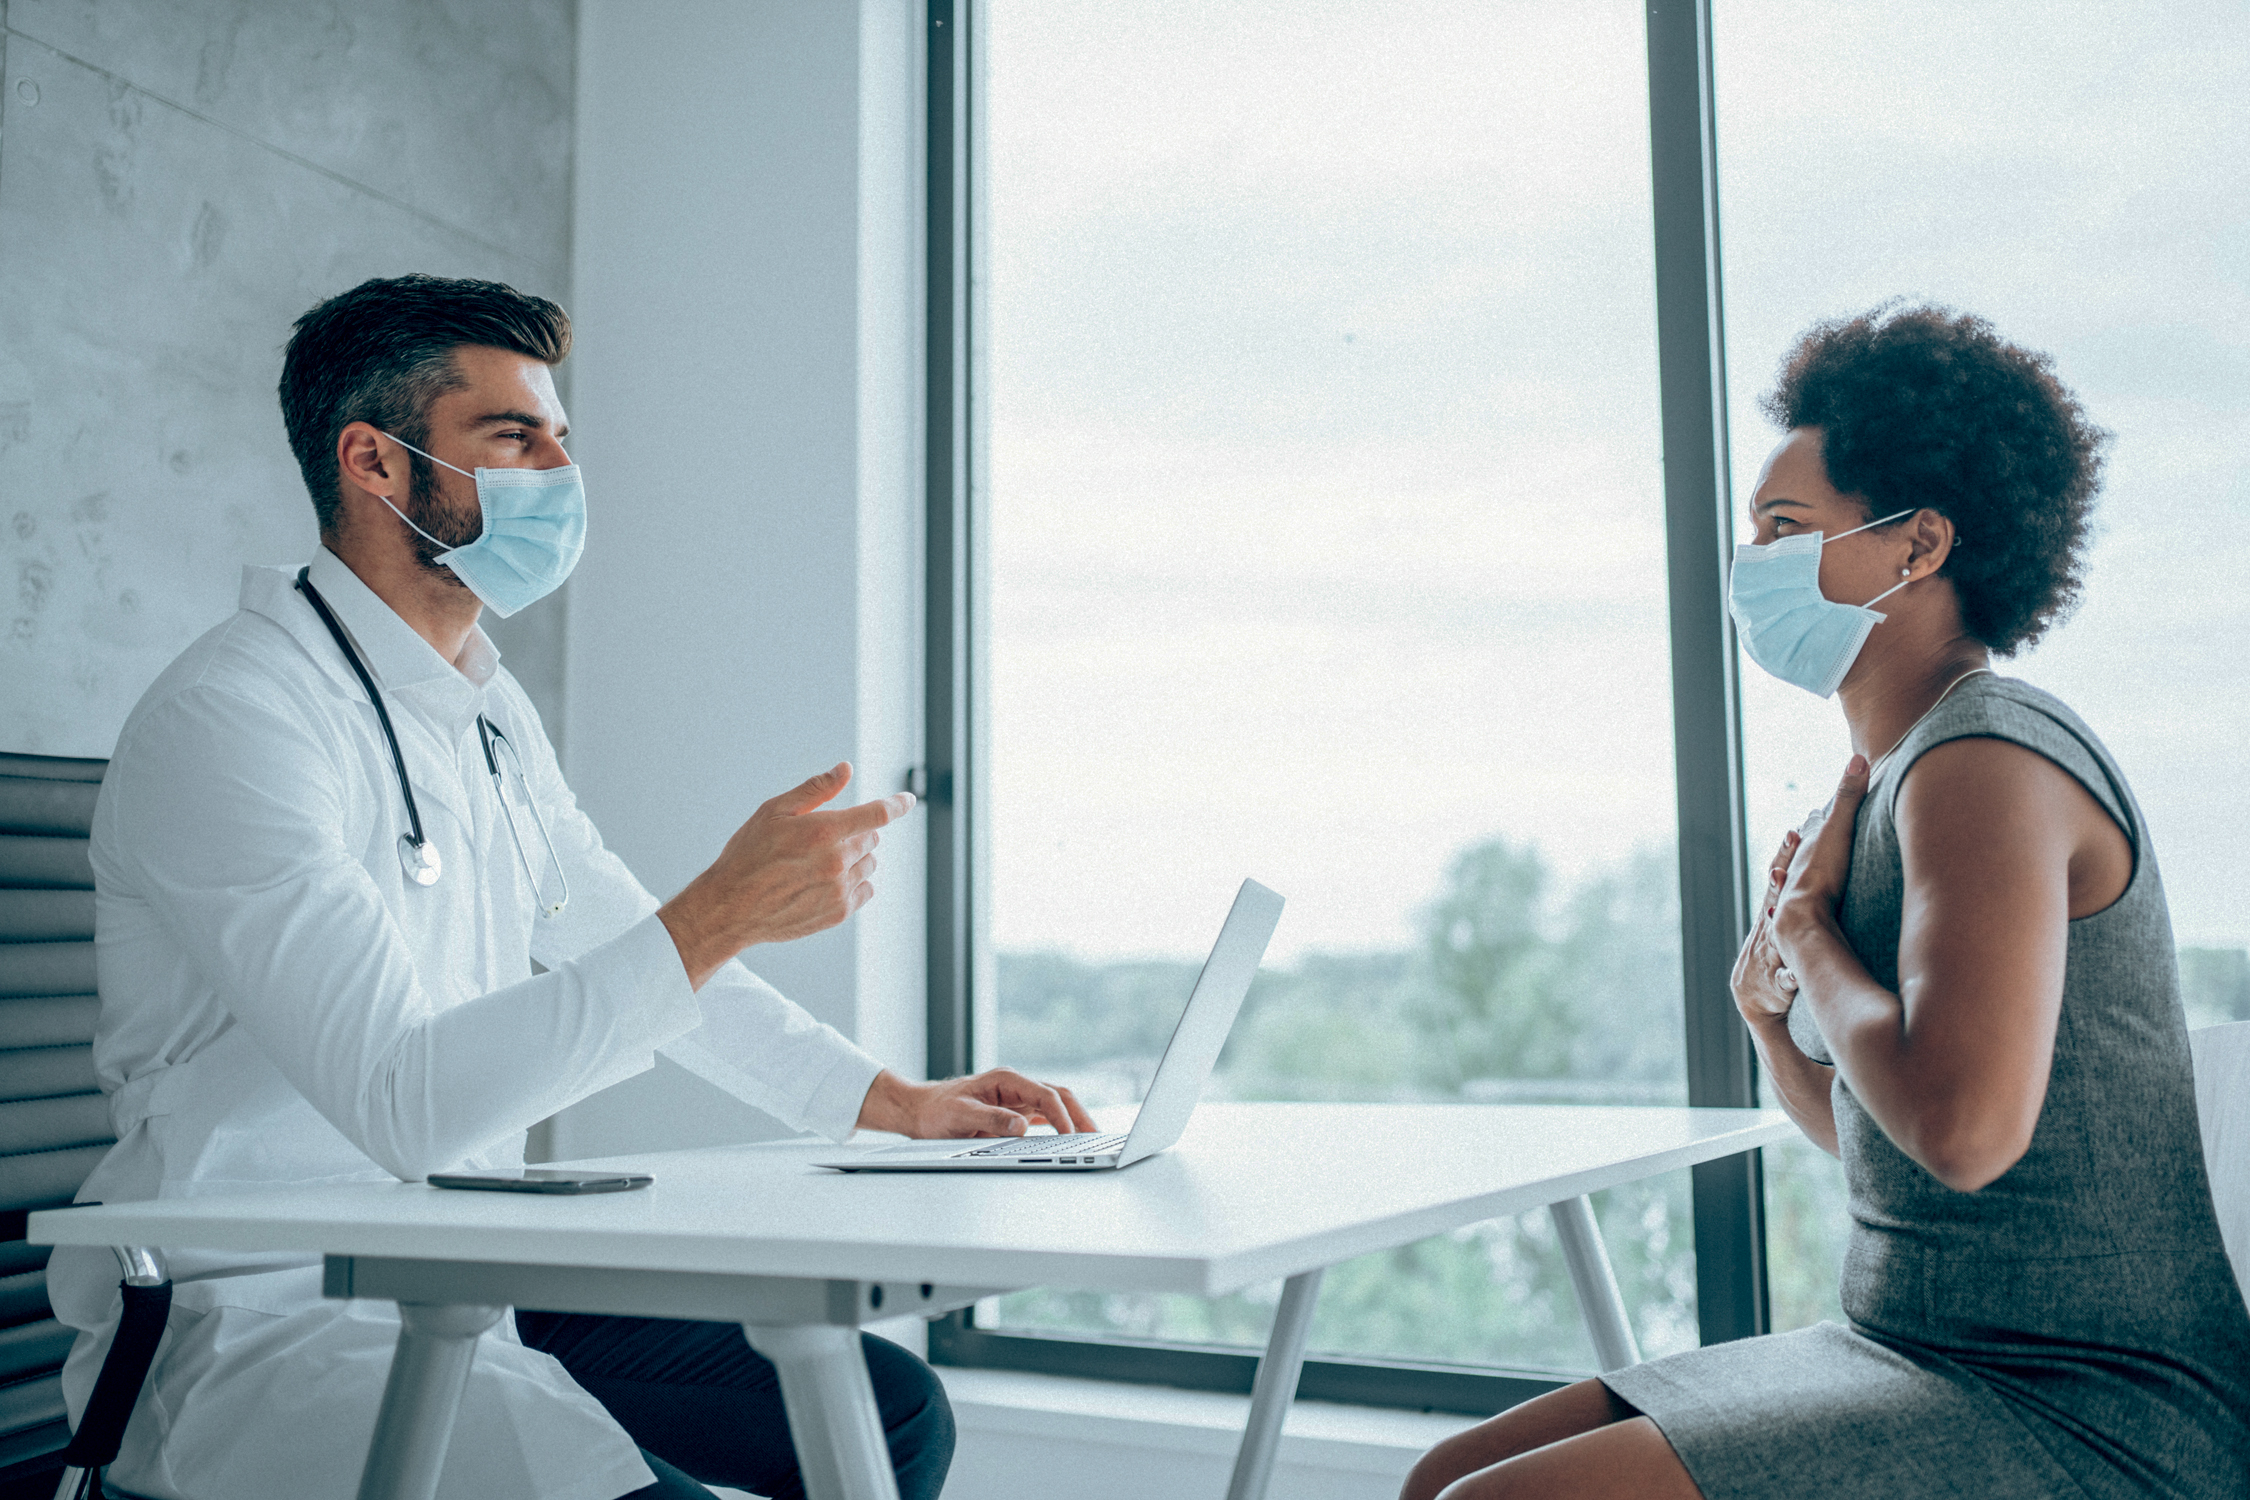 African-american woman sitting opposite the doctor in his office and discussing her medical results. A patient and a male doctor meet in a medical clinic while wearing protective face masks to avoid the transfer of viruses.